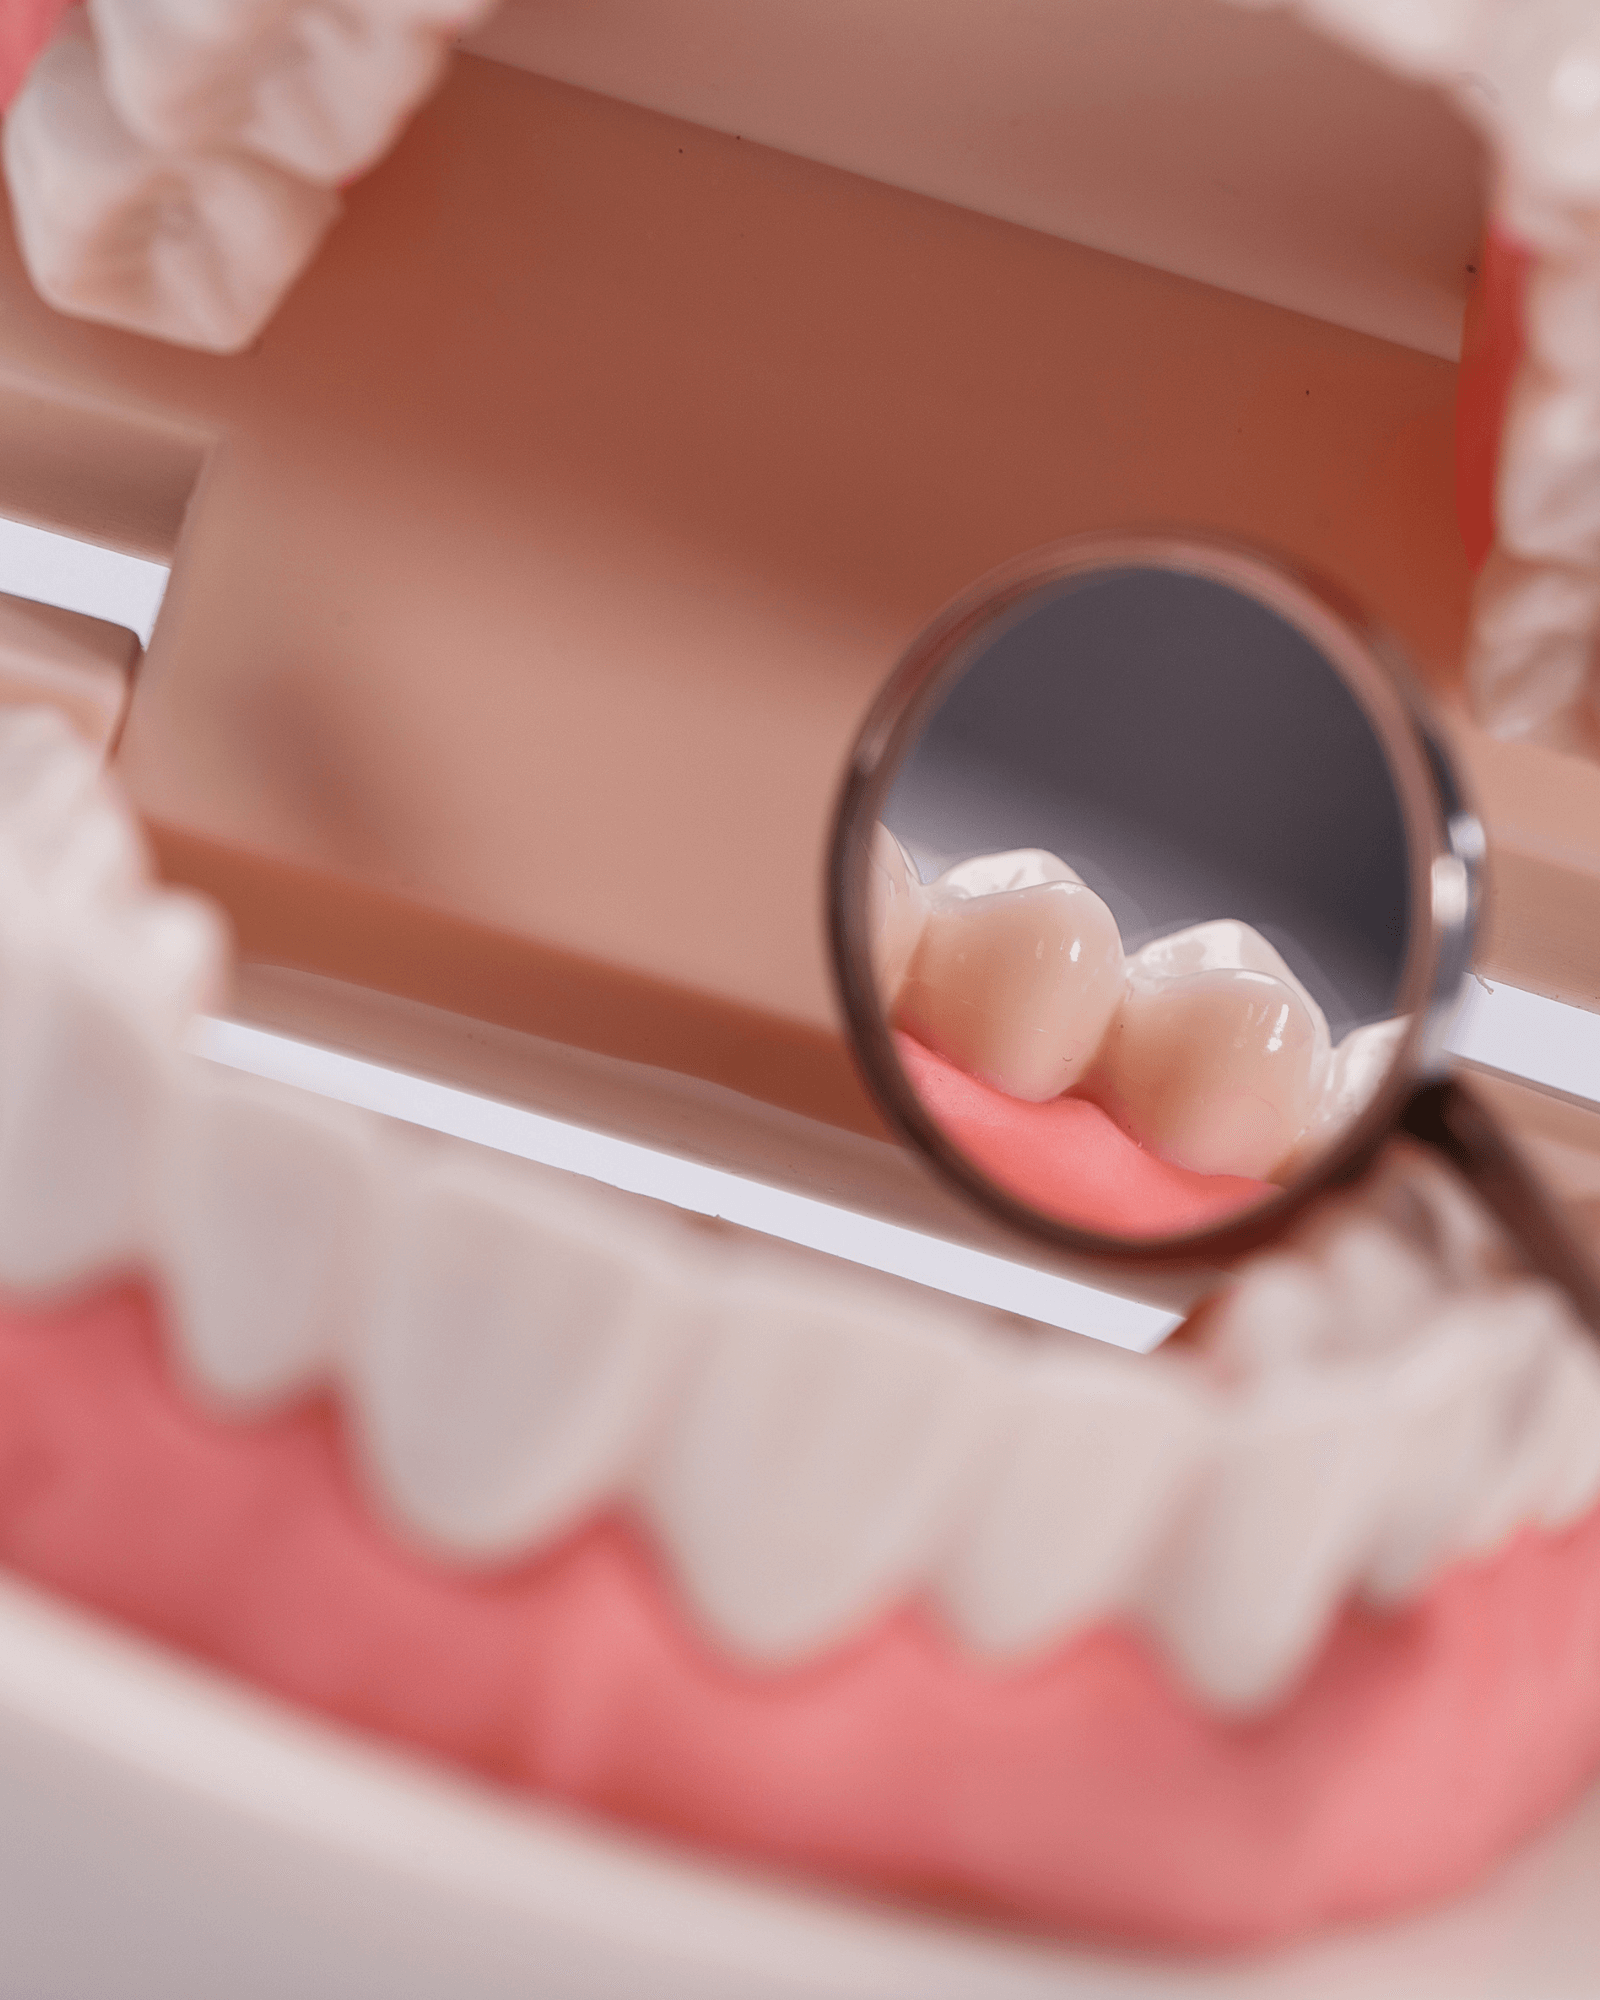 plastic model of a mouth and a dentist mirror